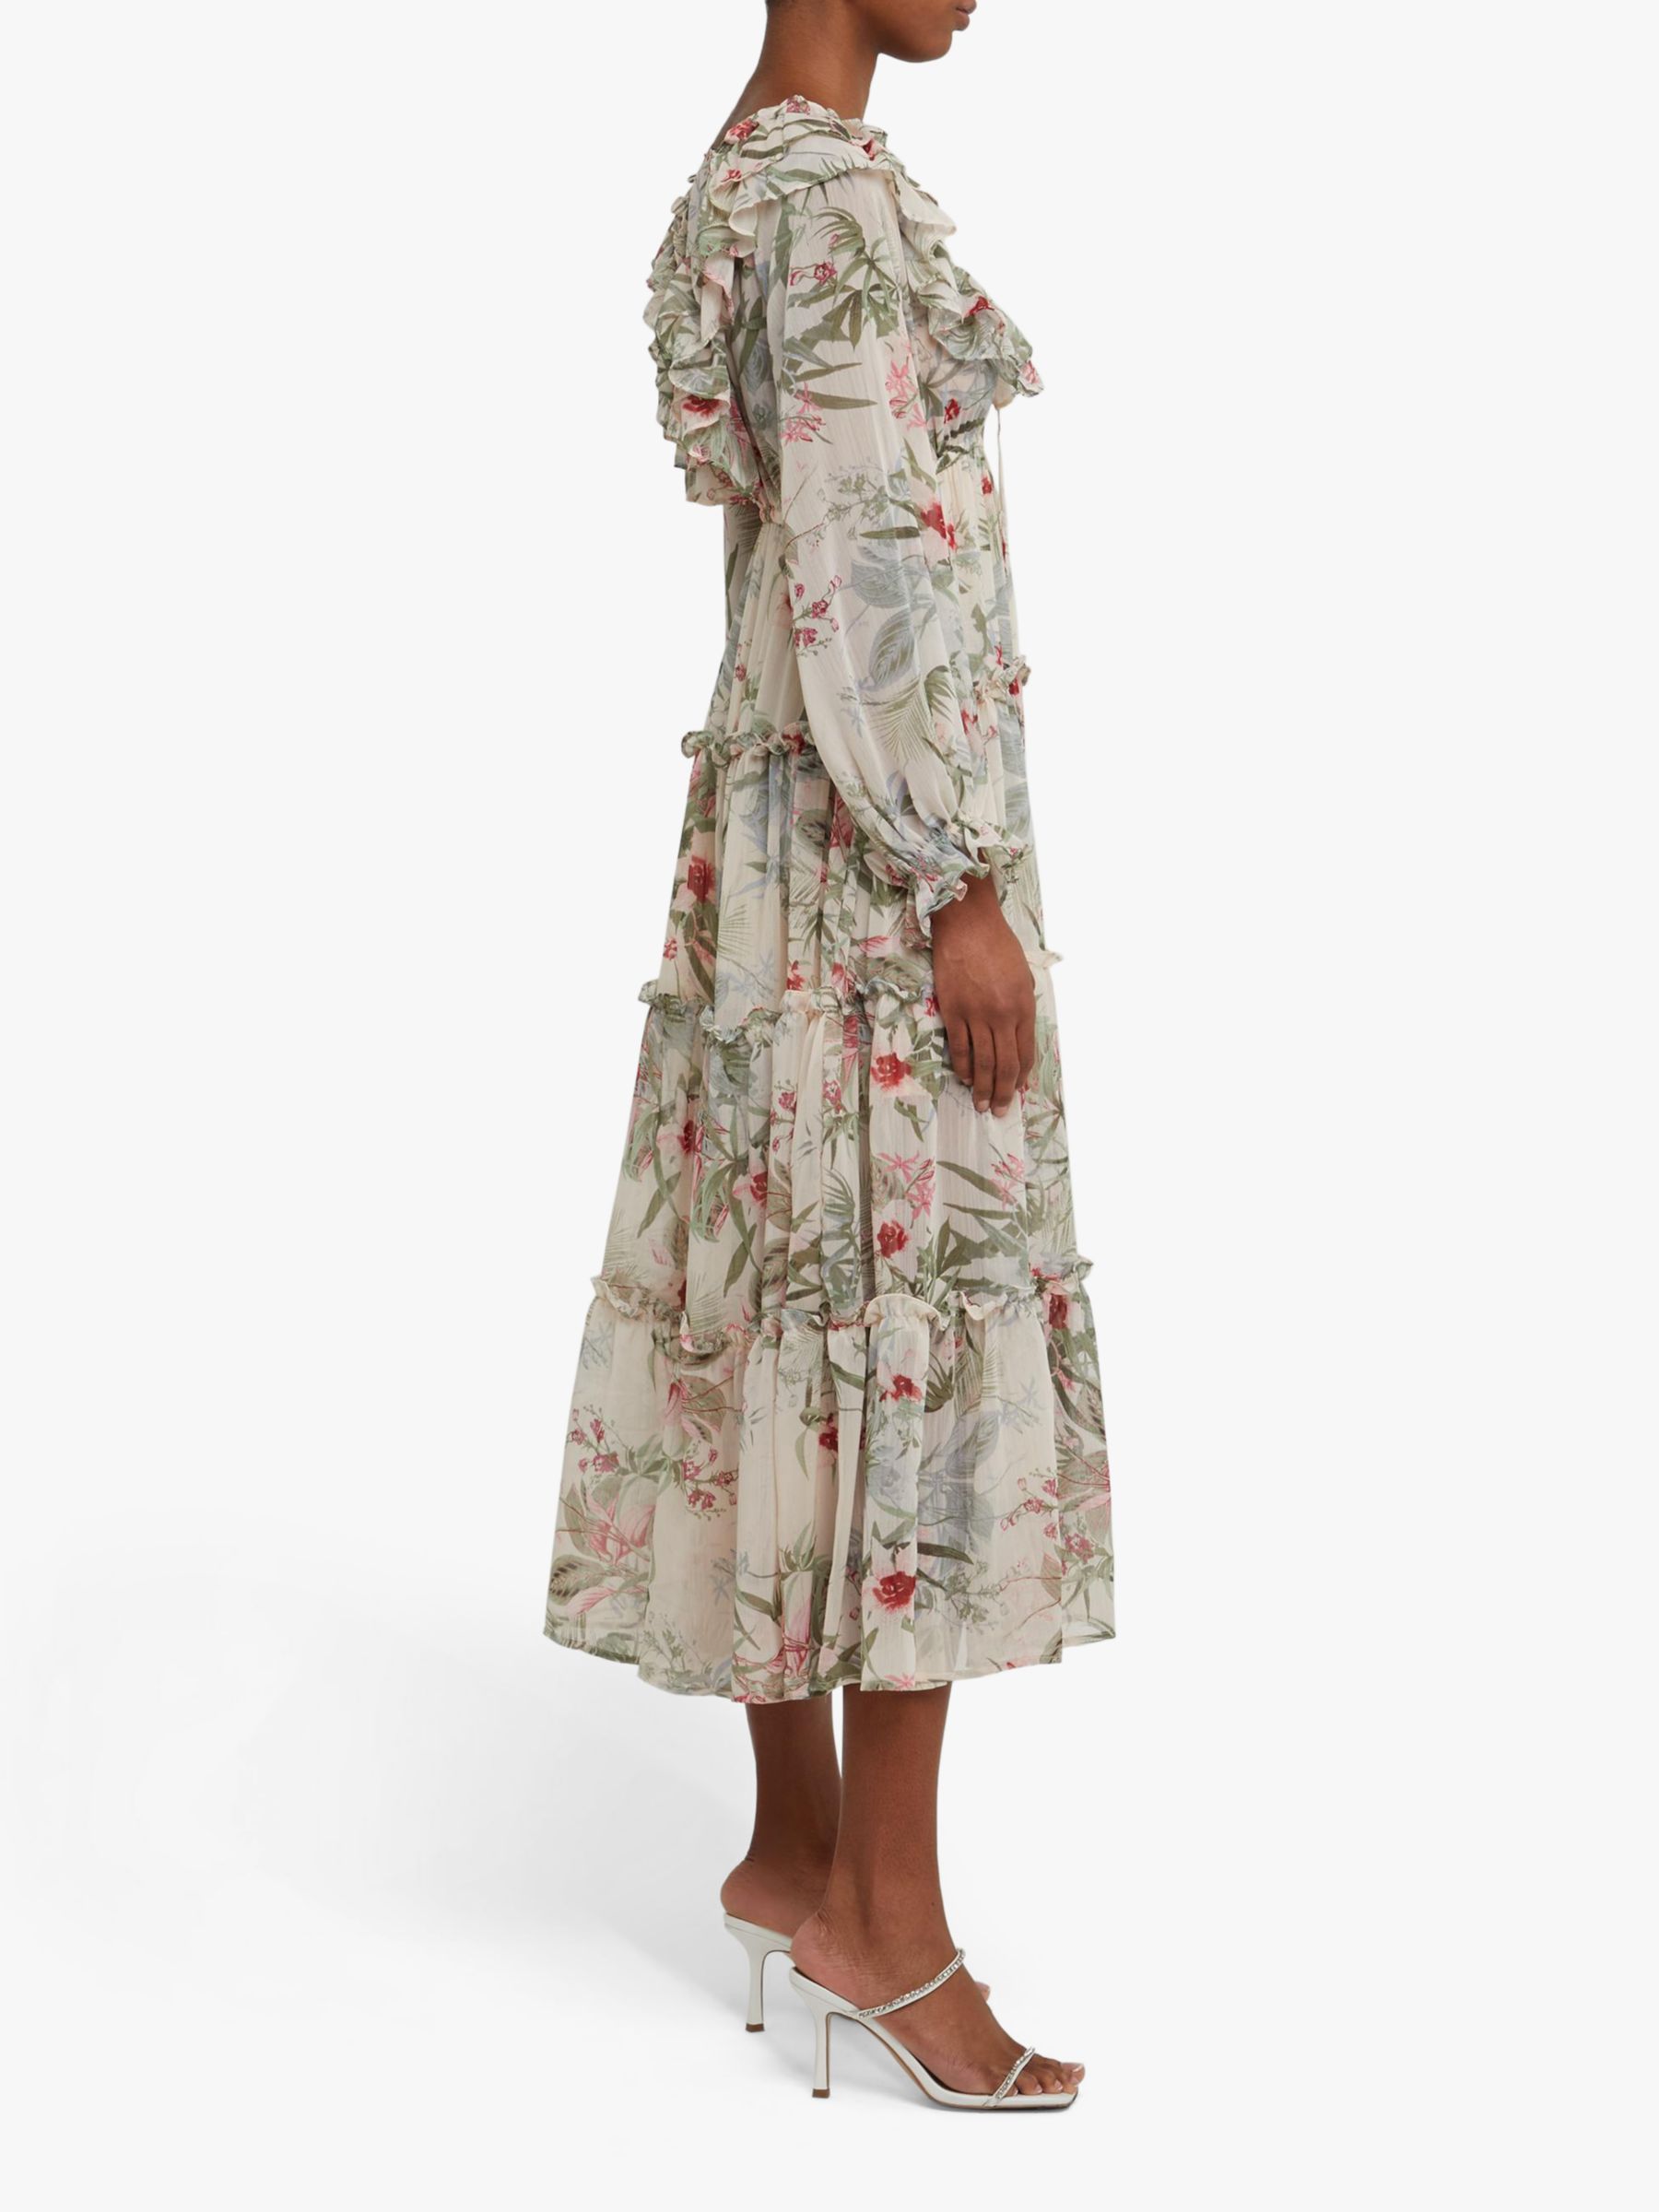 o.p.t Indria Floral Print Tiered Dress, Green/Multi at John Lewis ...